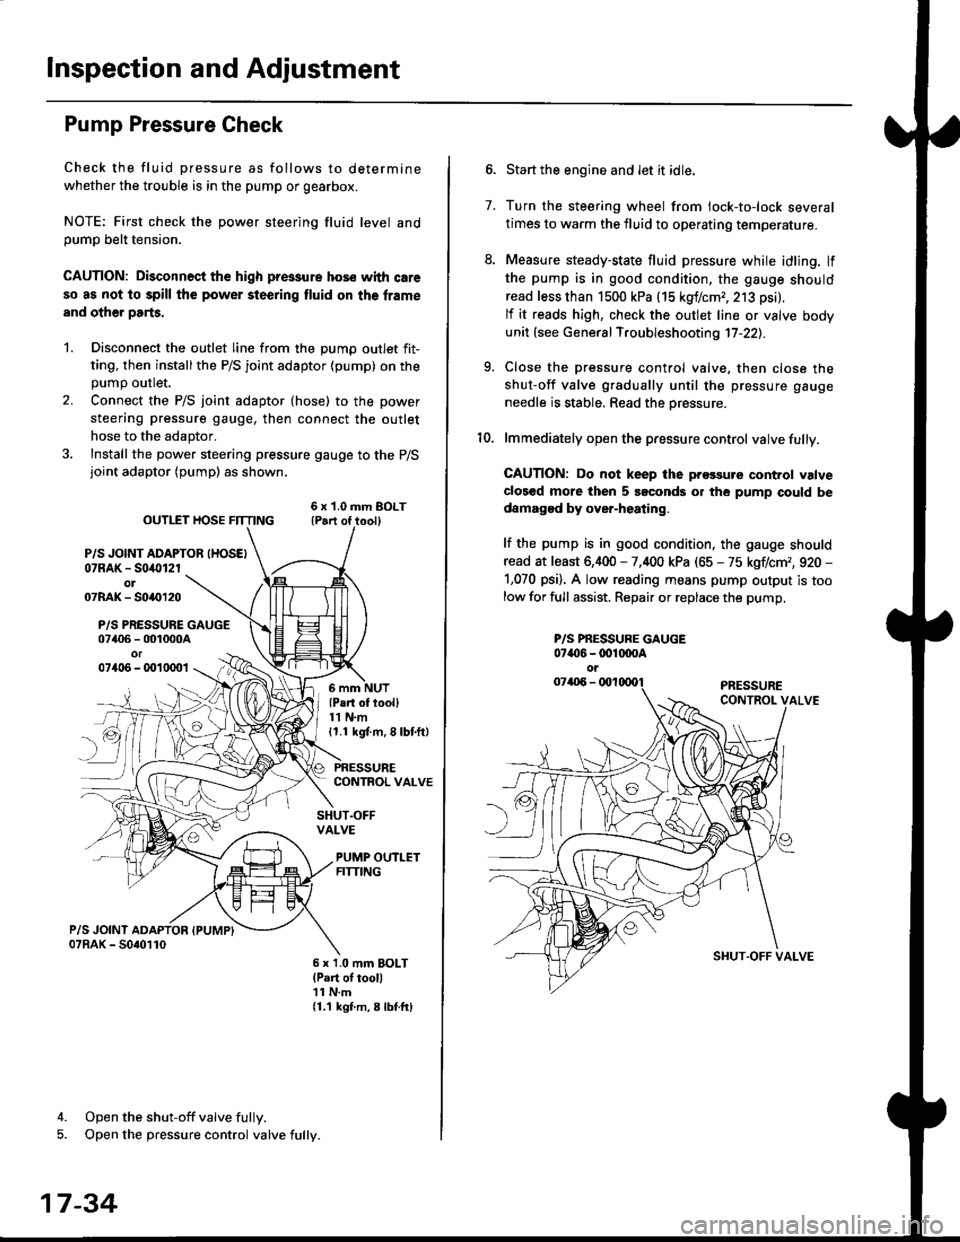 HONDA CIVIC 1998 6.G Owners Guide lnspection and Adjustment
Pump Pressure Check
Check the fluid pressure as follows to determine
whether the trouble is in the pump or gearbox.
NOTE: First check the power steering fluid level andpump b